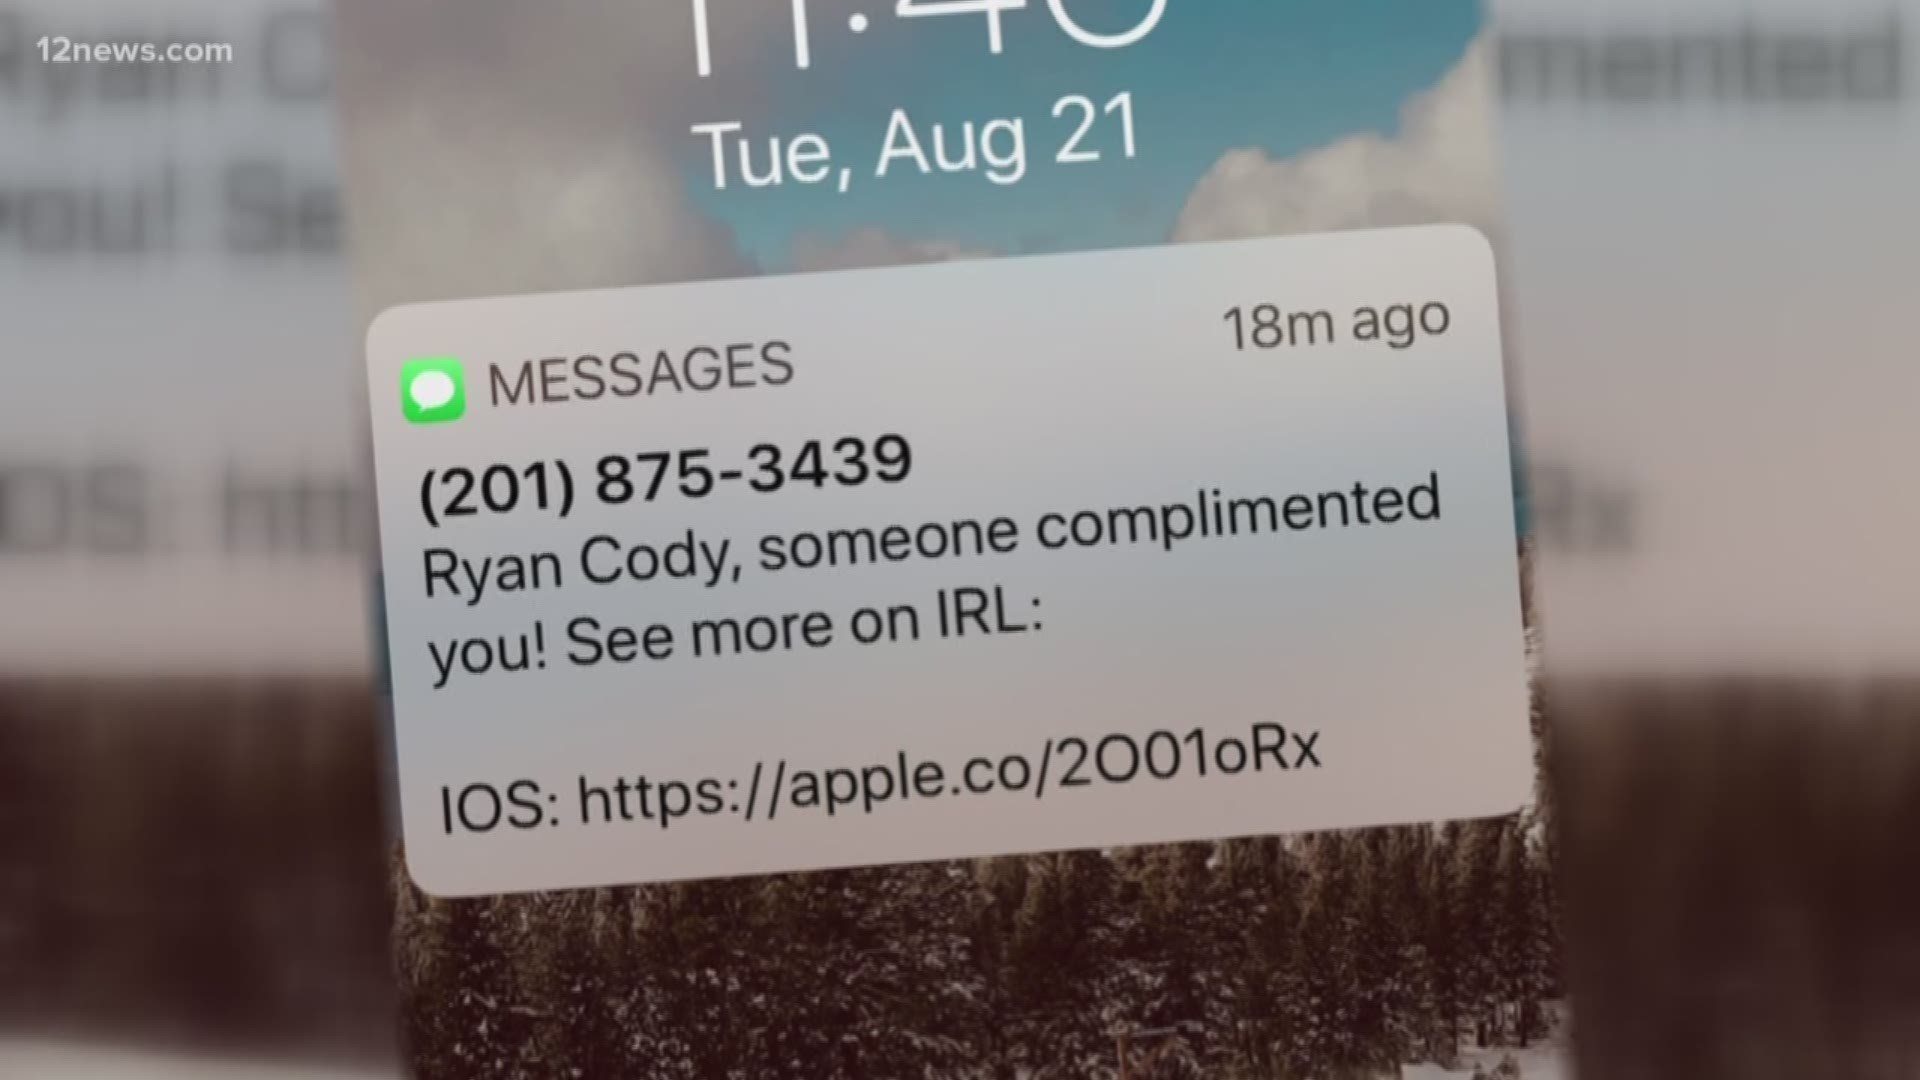 Getting a compliment via text from a random number is too good to be true, right? We look into who or what is behind the compliment text and if you need to protect yourself from it.